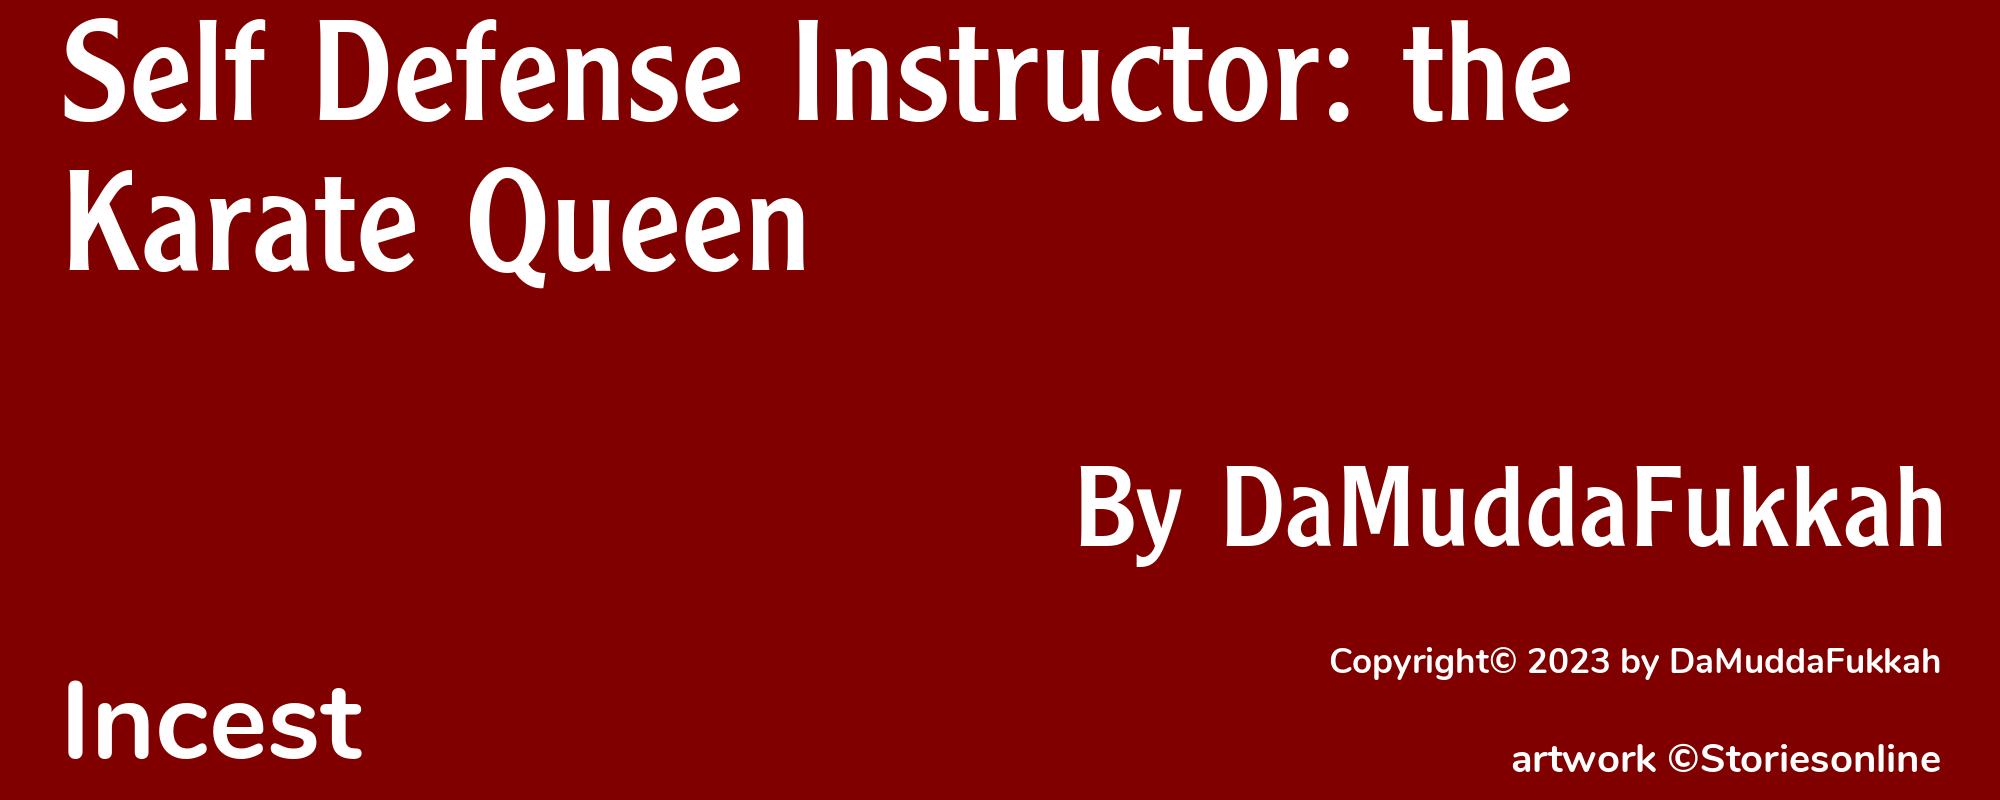 Self Defense Instructor: the Karate Queen - Cover